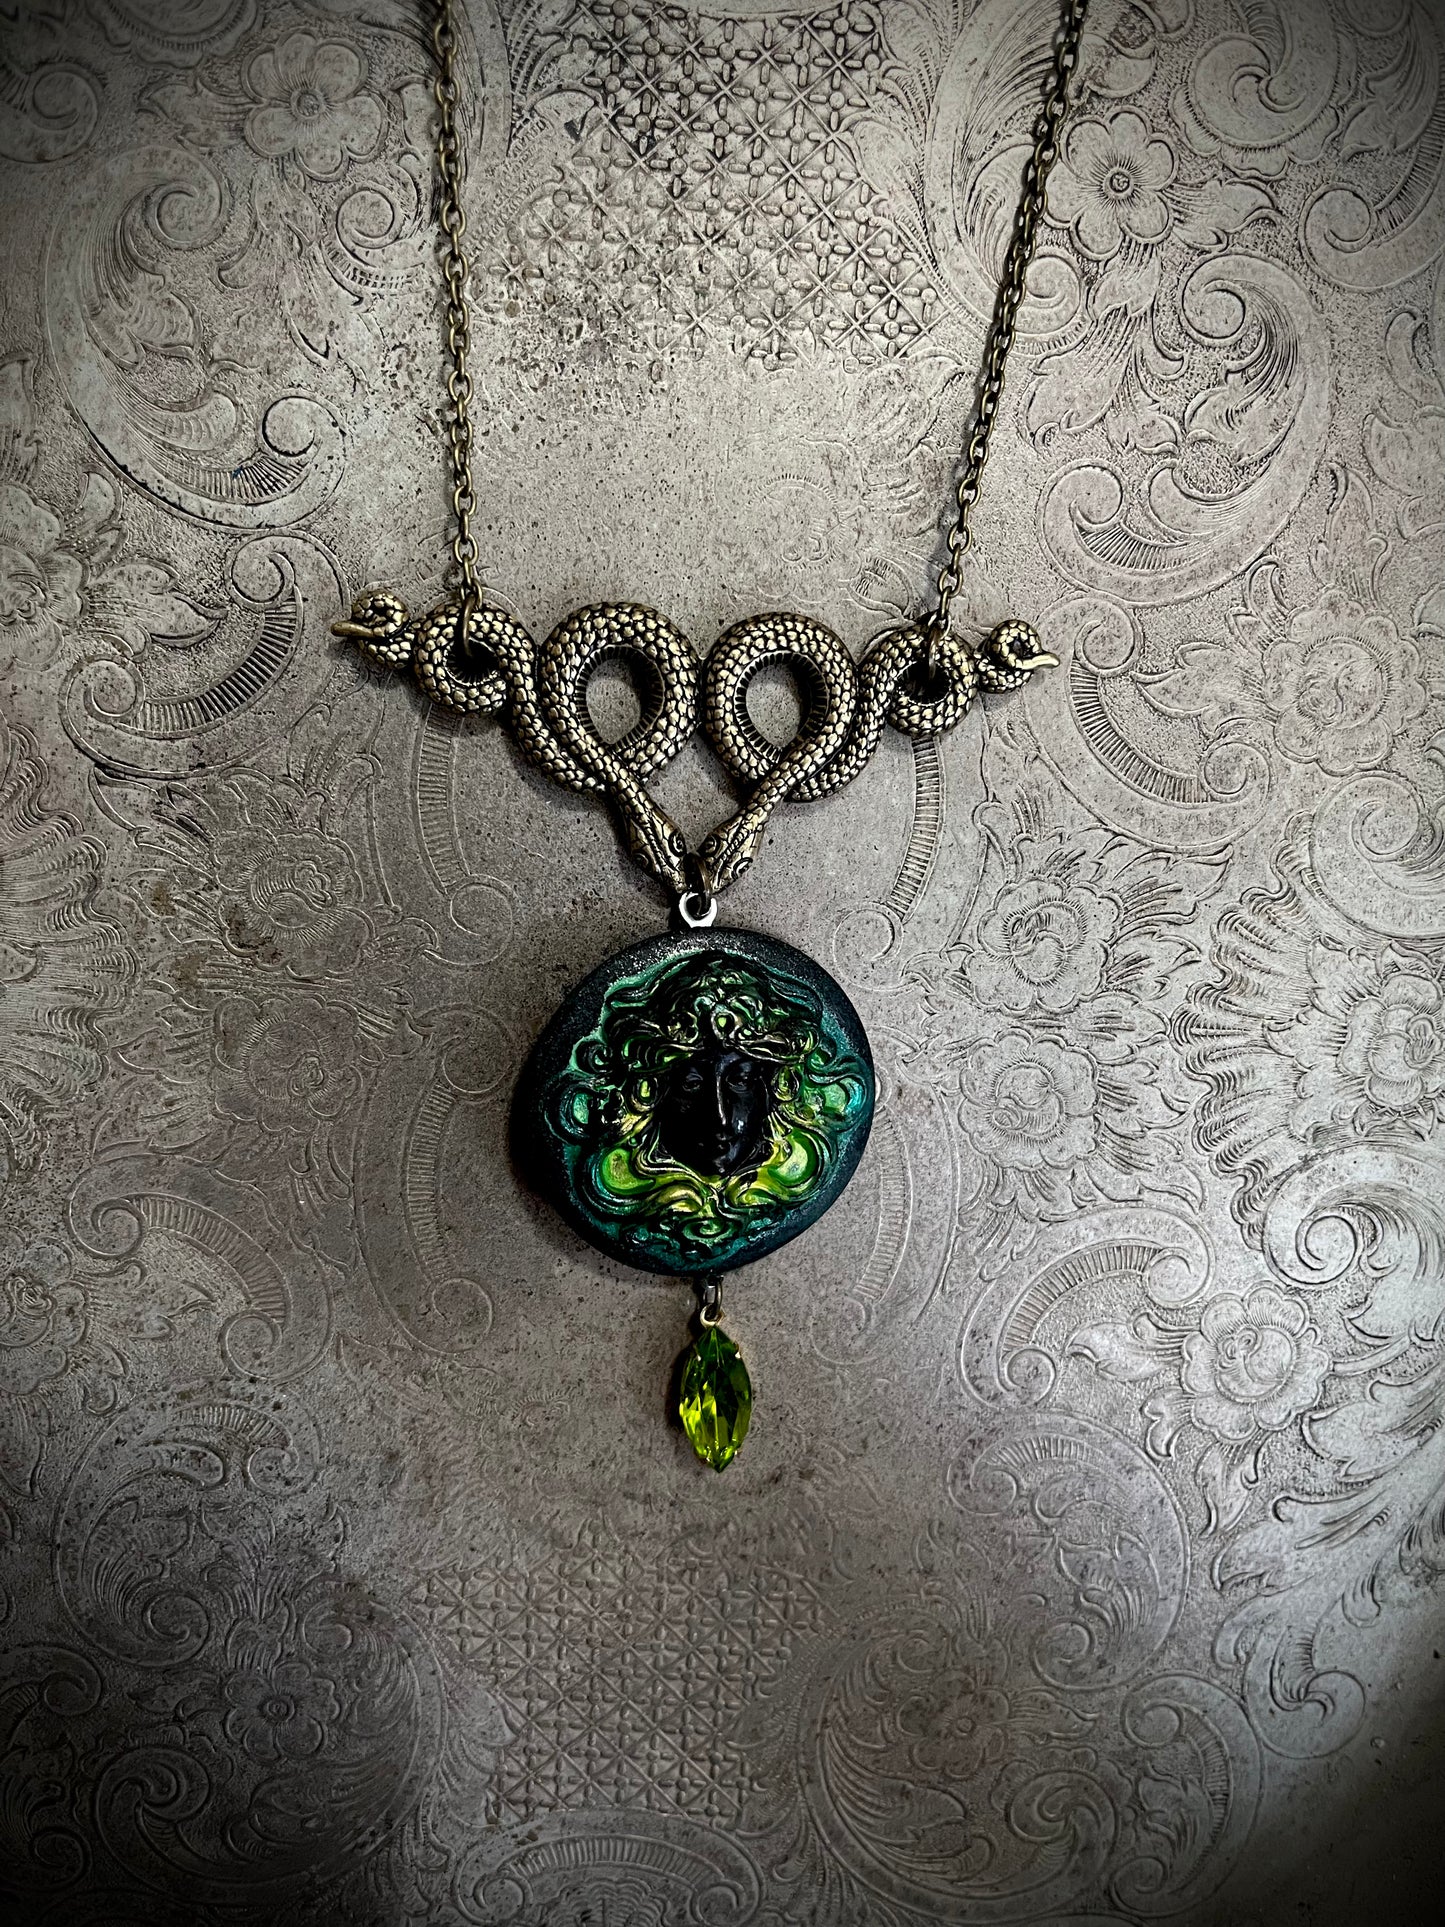 The Wrath of Medusa Necklace